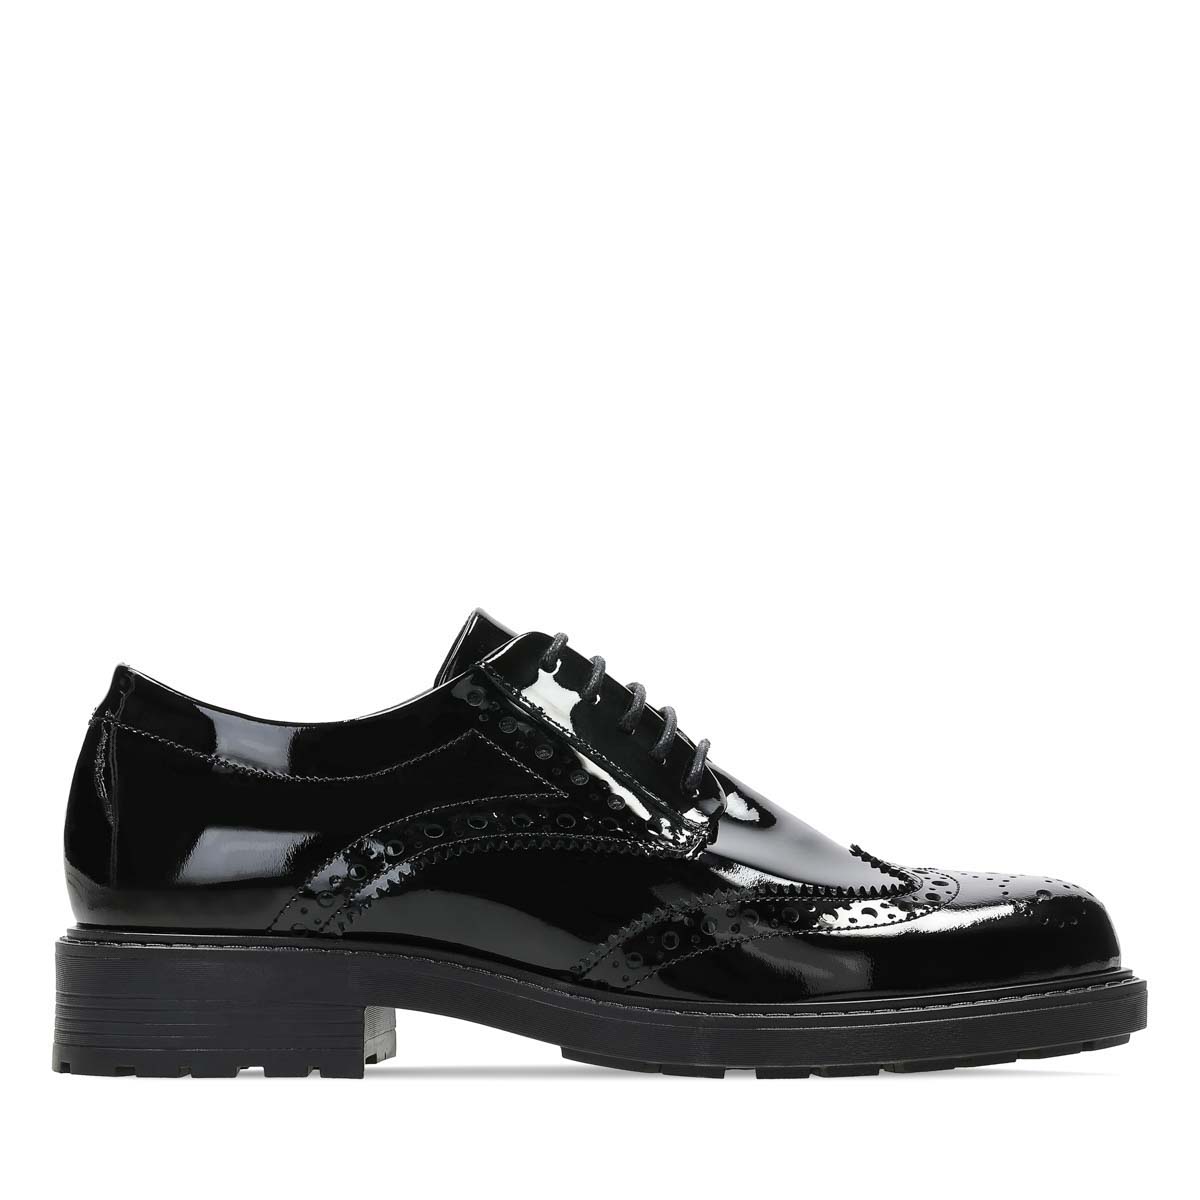 Clarks Orinoco Brogue D Fit Black Patent Leather Brogues